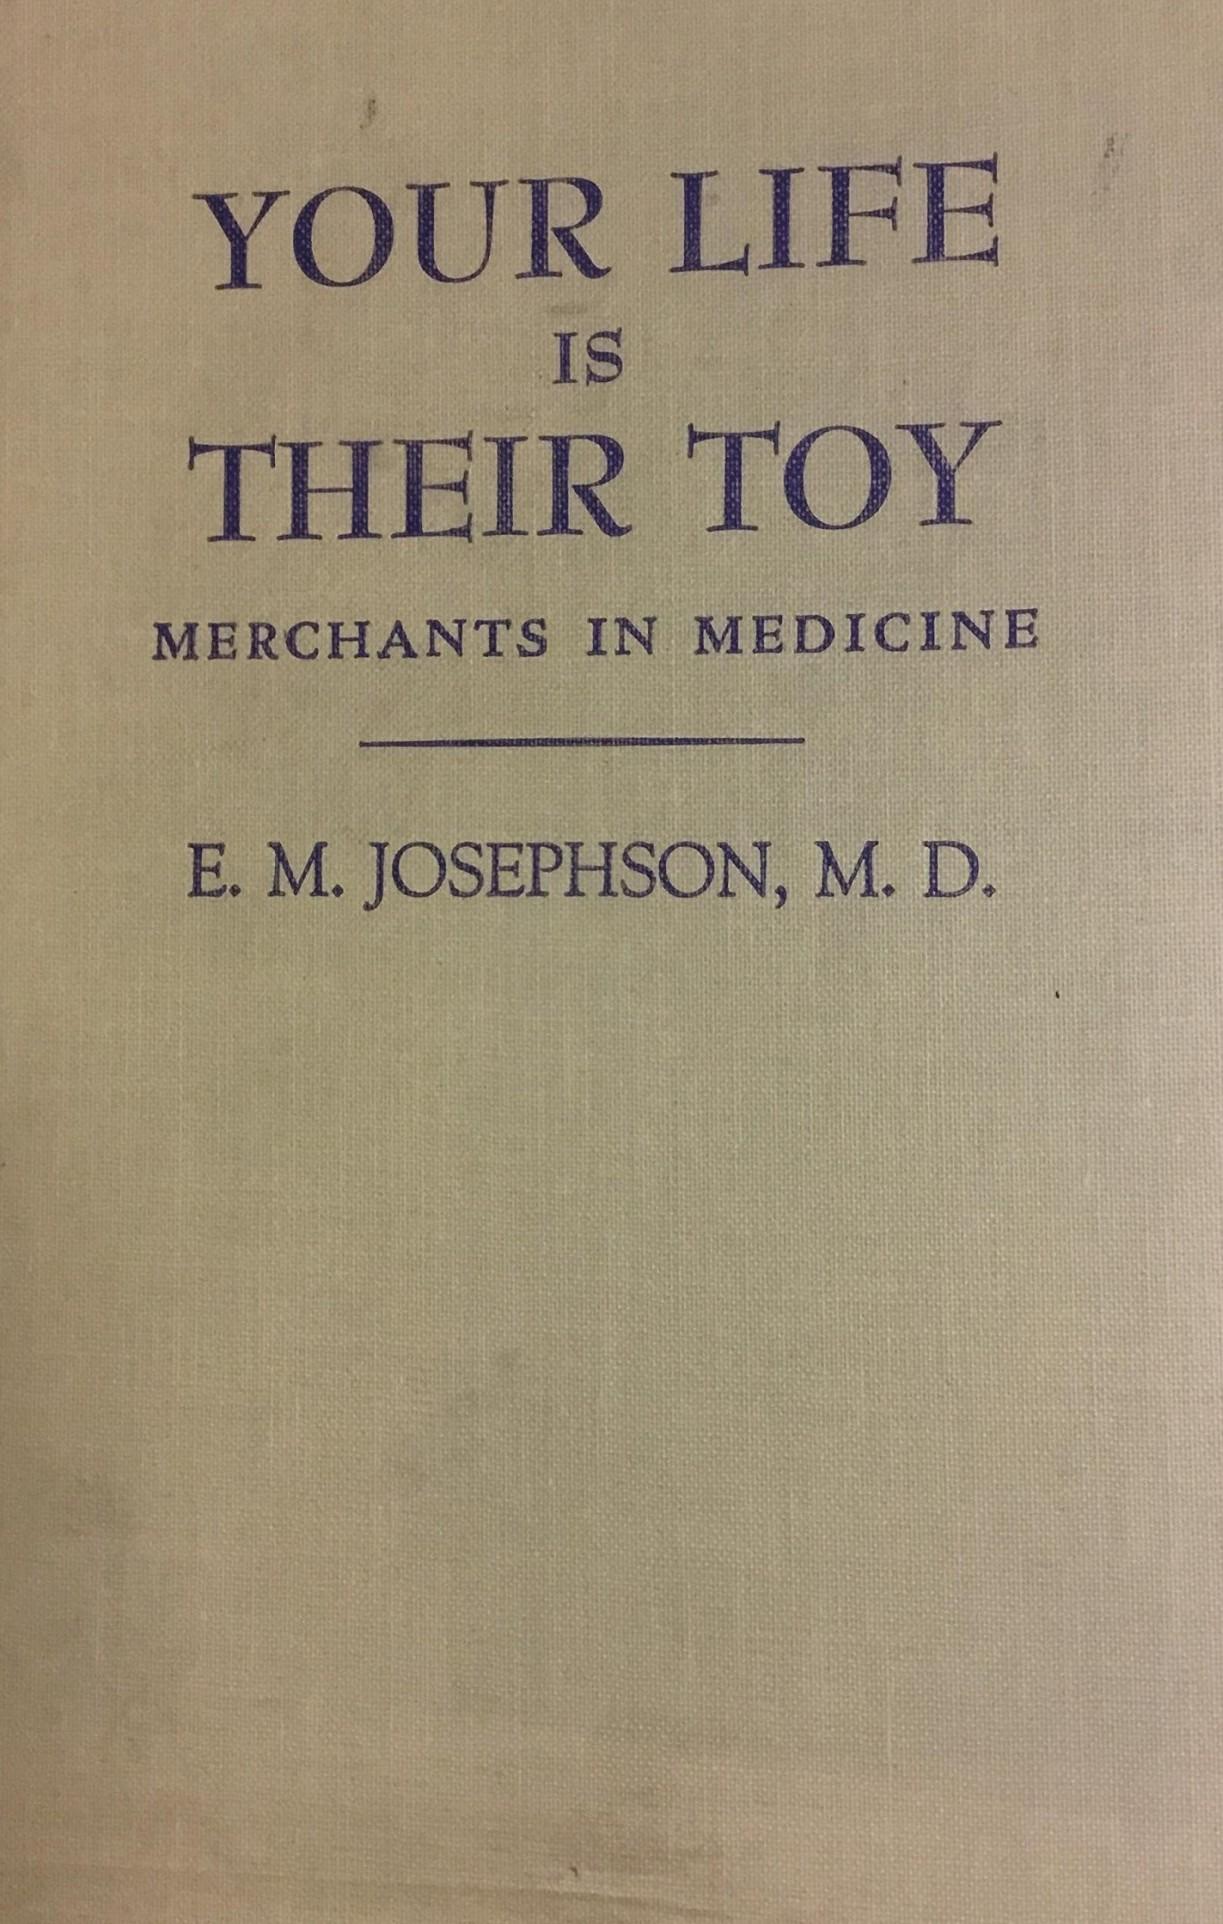 Your Life Is Their Toy: Merchants in Medicine (1948) by Emanuel M. Josephson